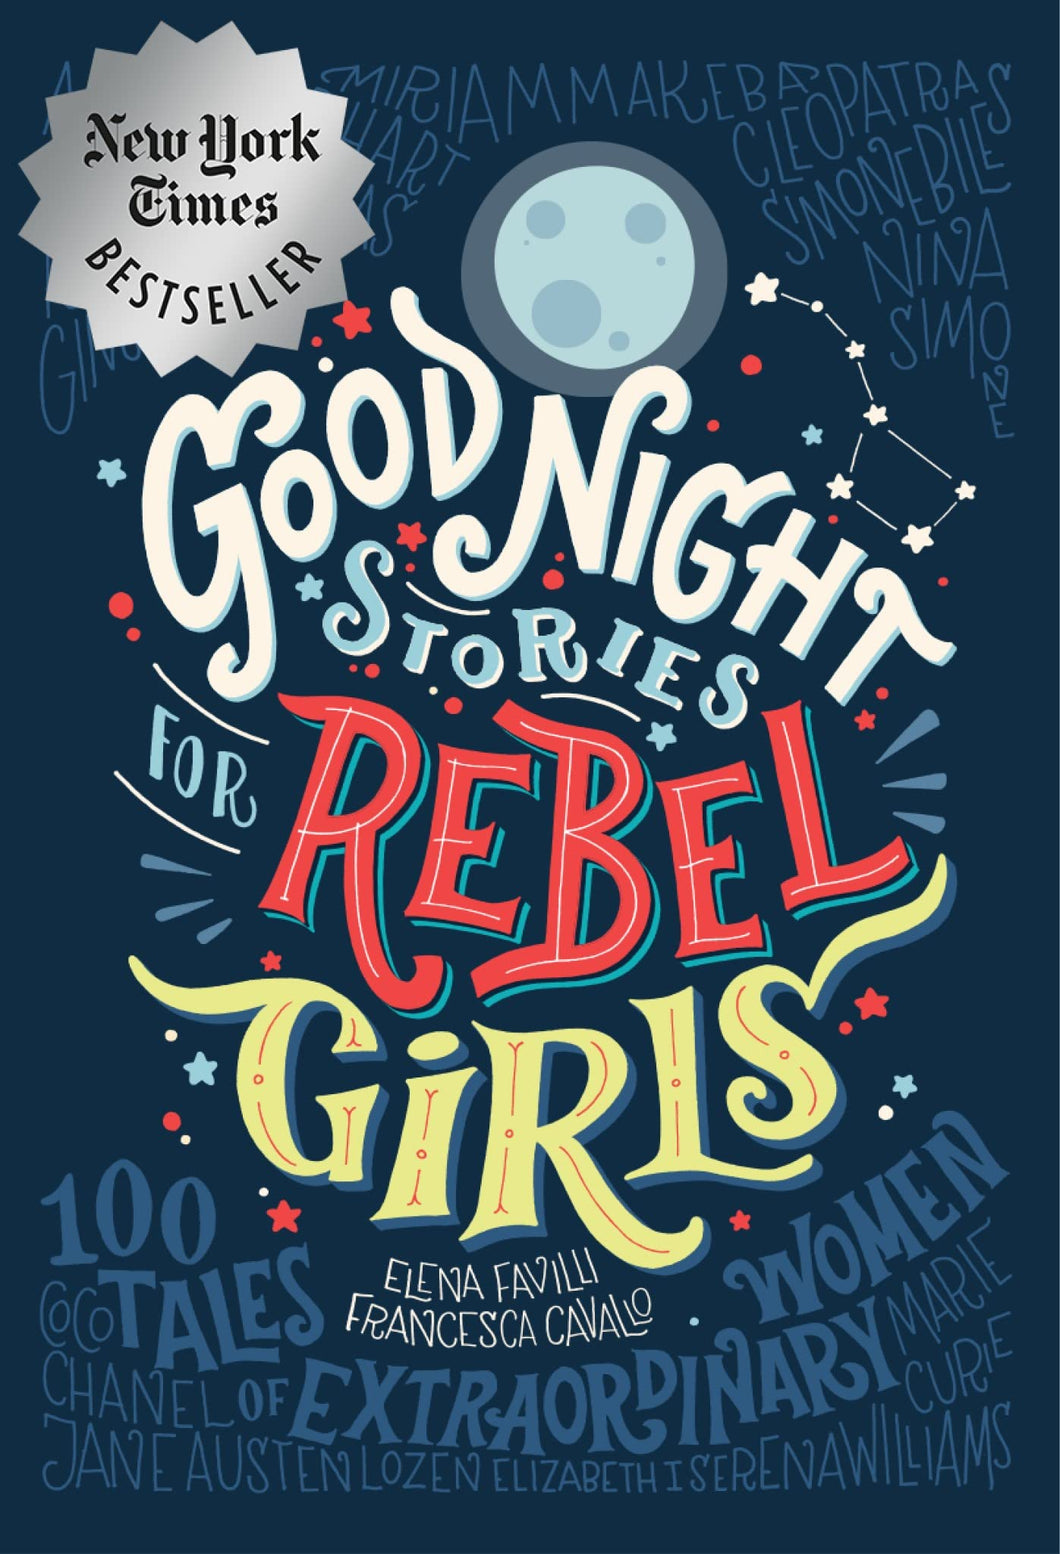 Goodnight Stories for Rebel Girls: 100 Tales of Extraordinary Women by Elena Favilli and Francesca Cavallo